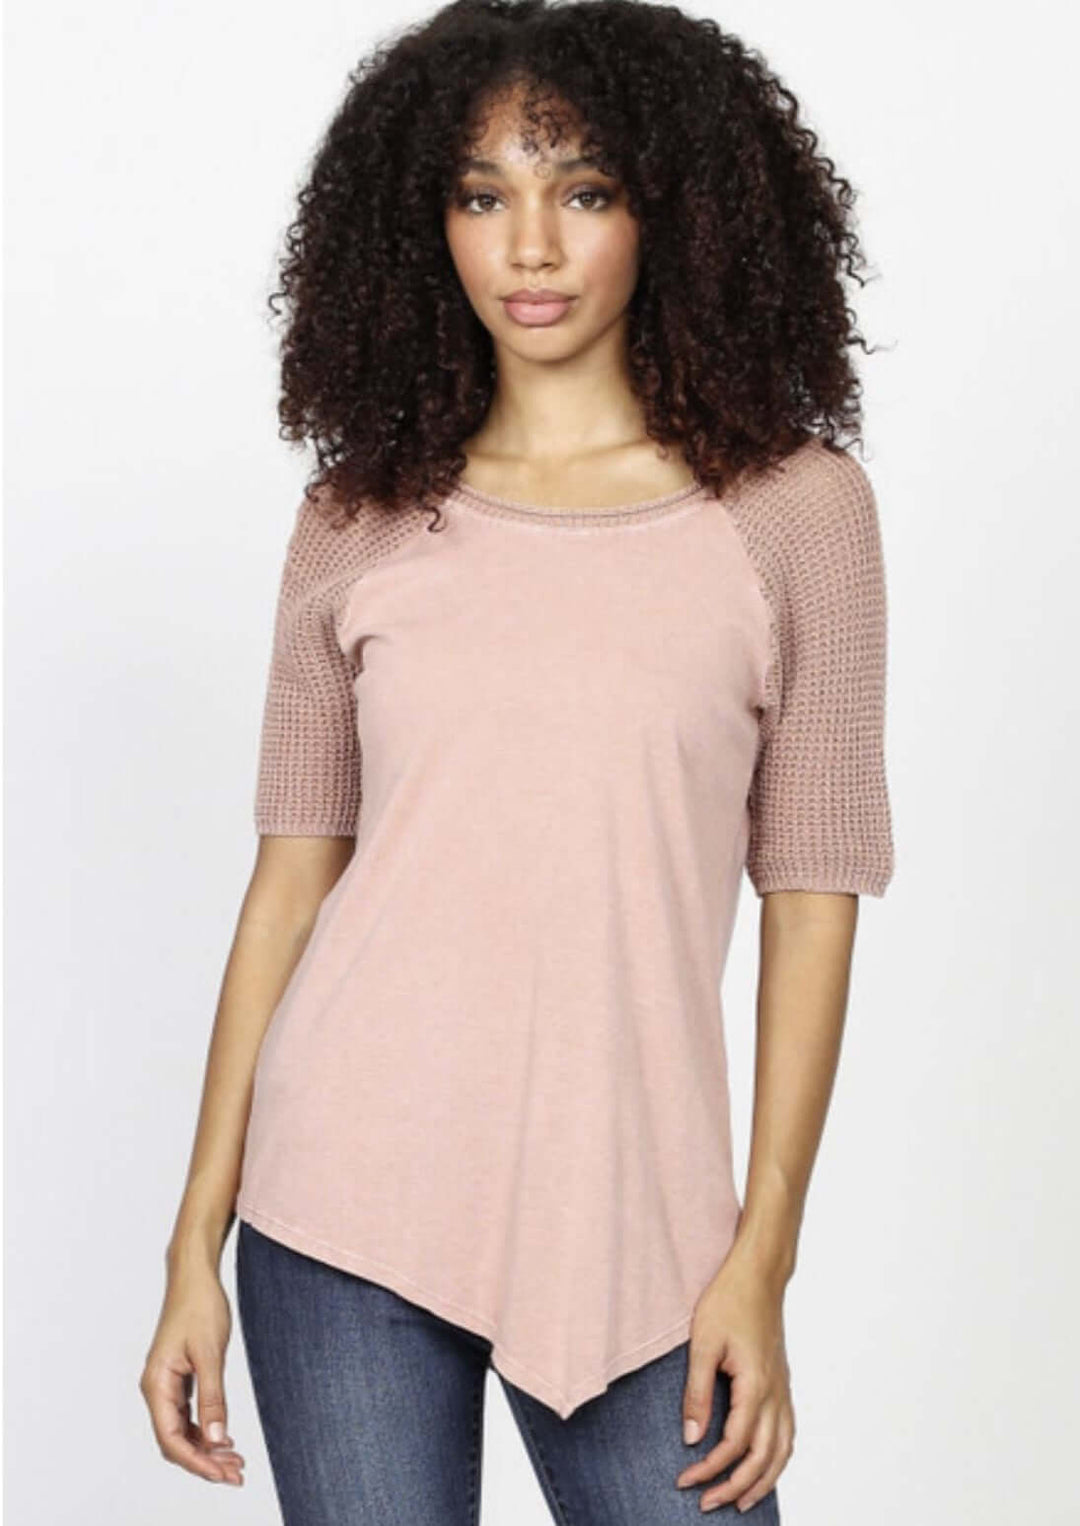 USA Made Waffle Knit Sleeves Raglan Tee with Asymmetrical Hem in Vintage Blush made of 50% Cotton & 50% Modal | Classy Cozy Cool Women's Made in America Clothing Boutique